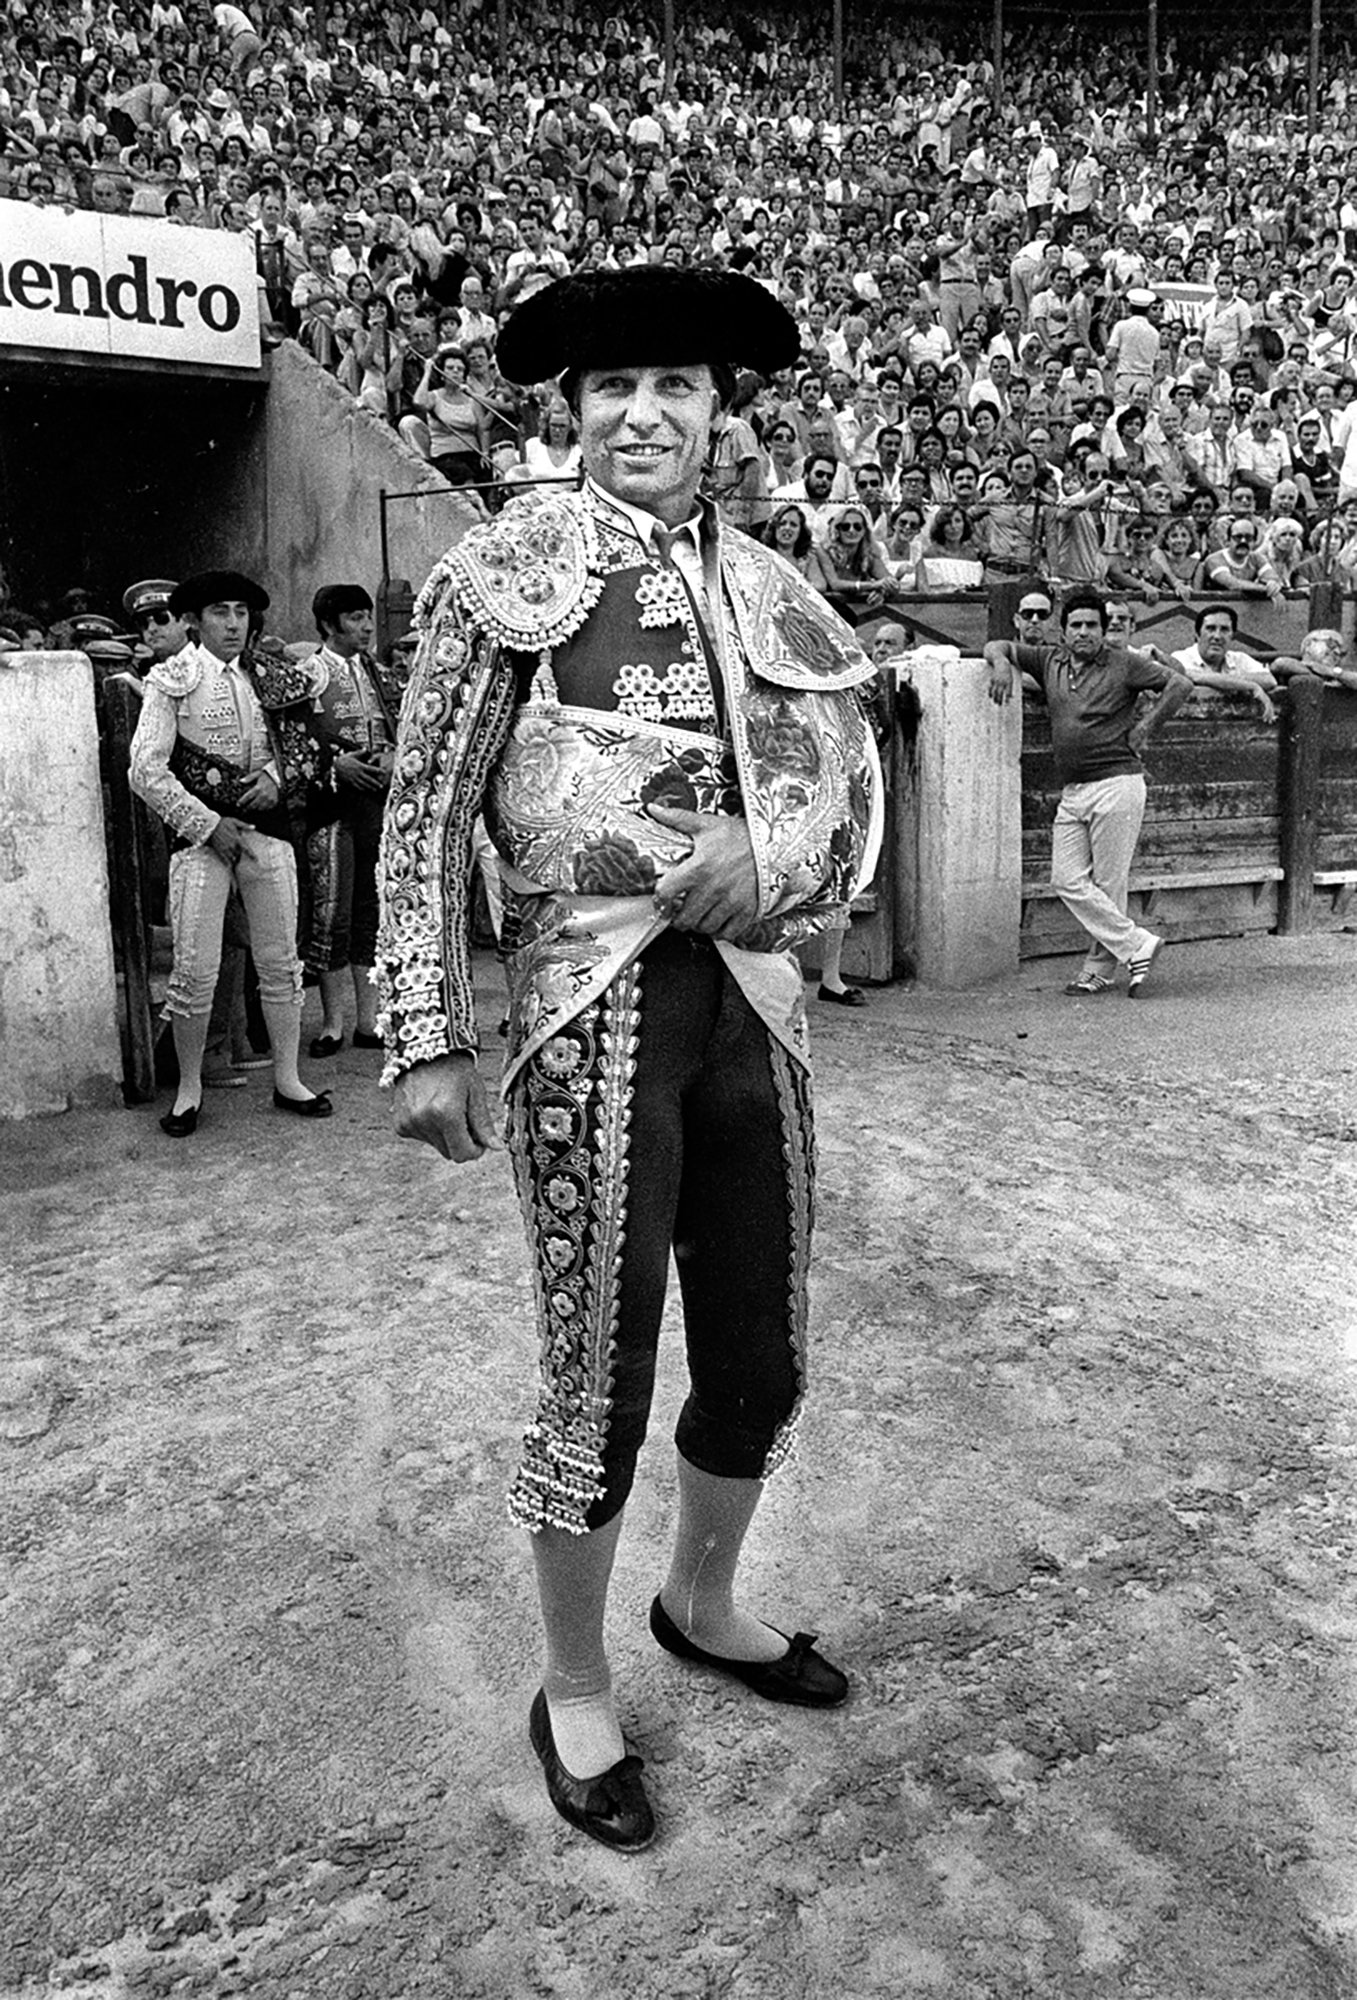 El Cordobés is a Spanish bullfighter, matador, and actor here in the plaza de toros of Alicante in the sixties Photography Pierre Toutain-Dorbec.jpg